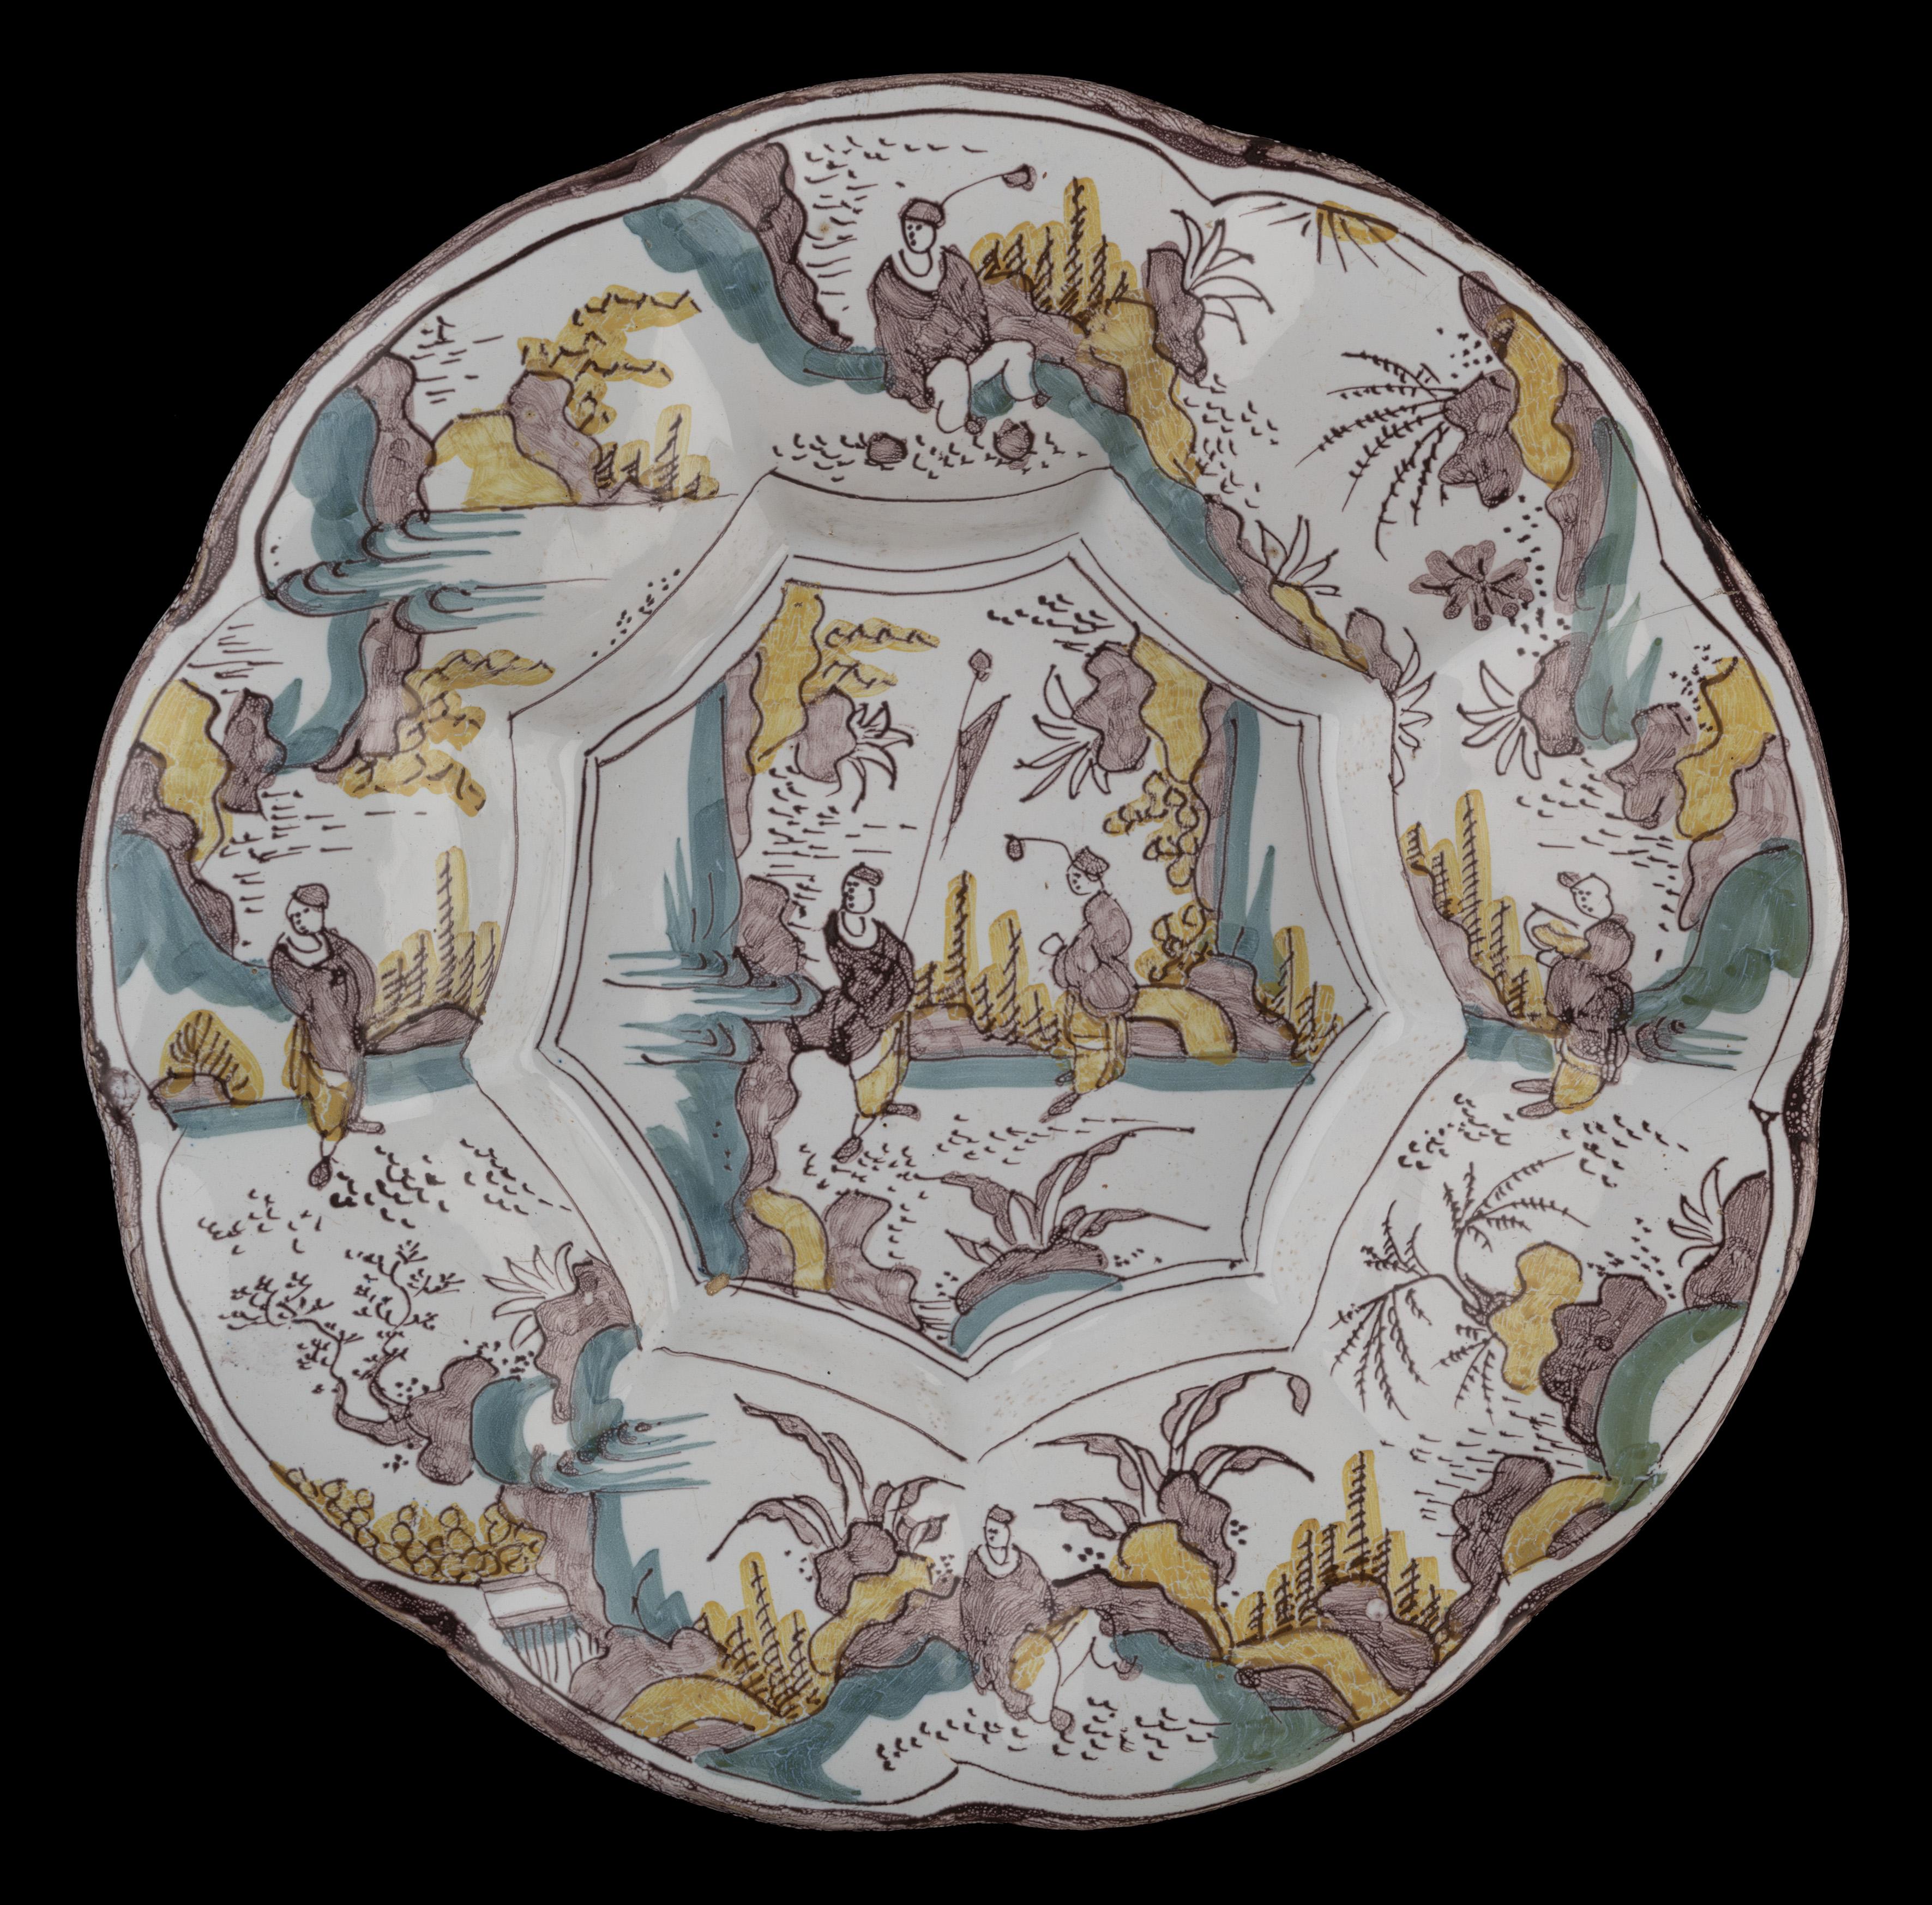 Polychrome chinoiserie lobed dish. Delft, 1680-1690 
The lobed dish is composed of nine wide lobes around a nine-fold centre and is painted with a chinoiserie decor in purple, yellow and green. Two Chinese figures in an eastern landscape are